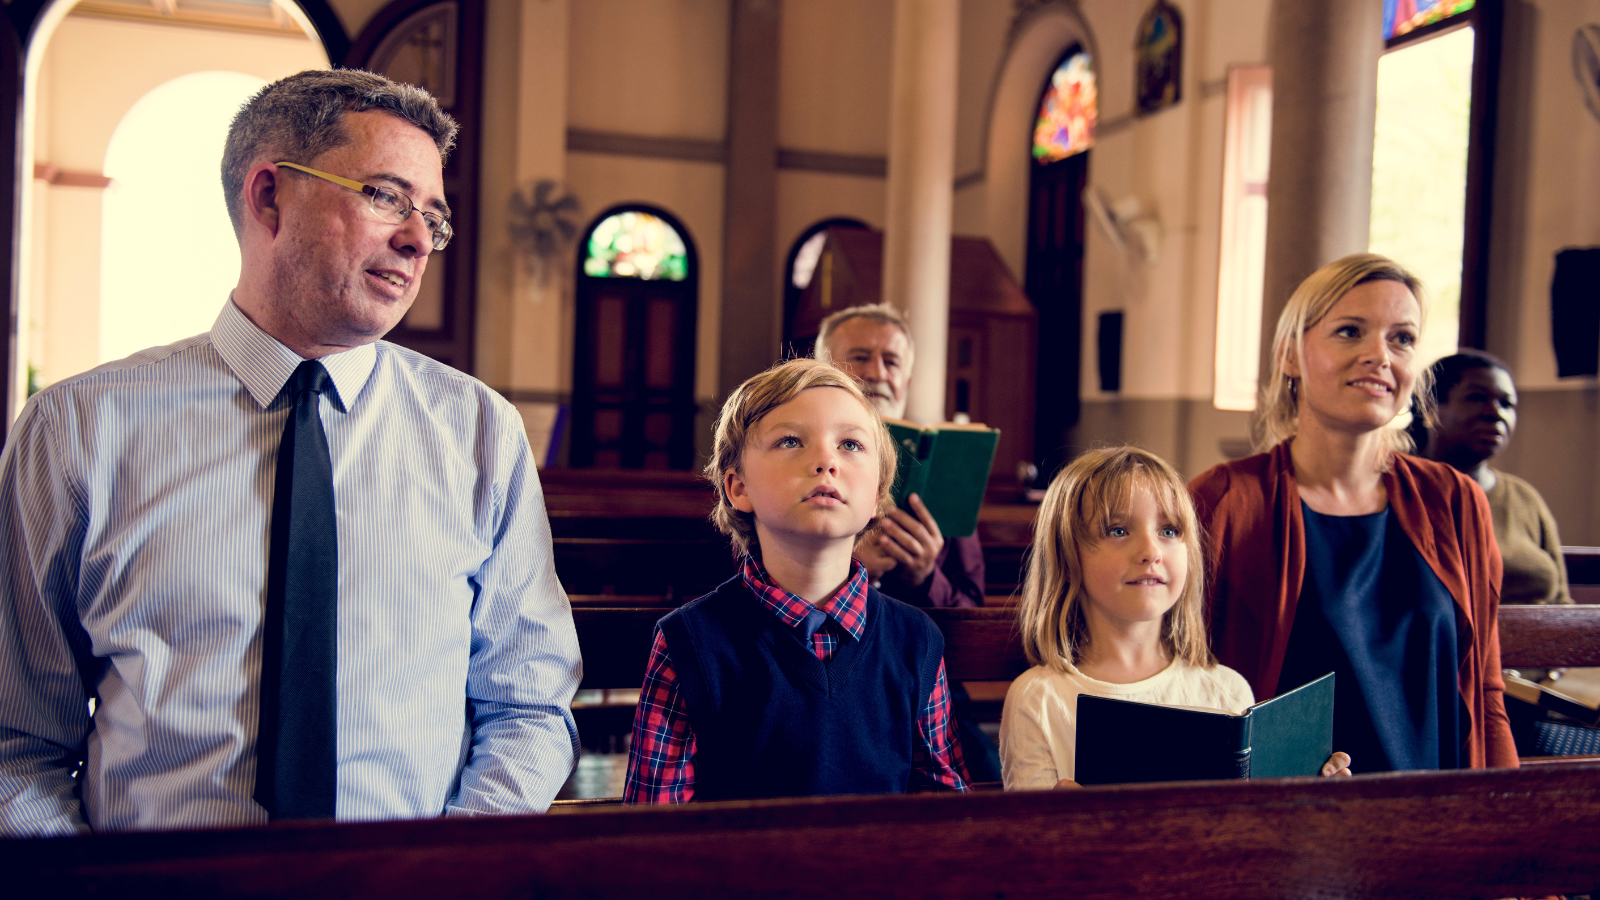 Strict Christian family at church